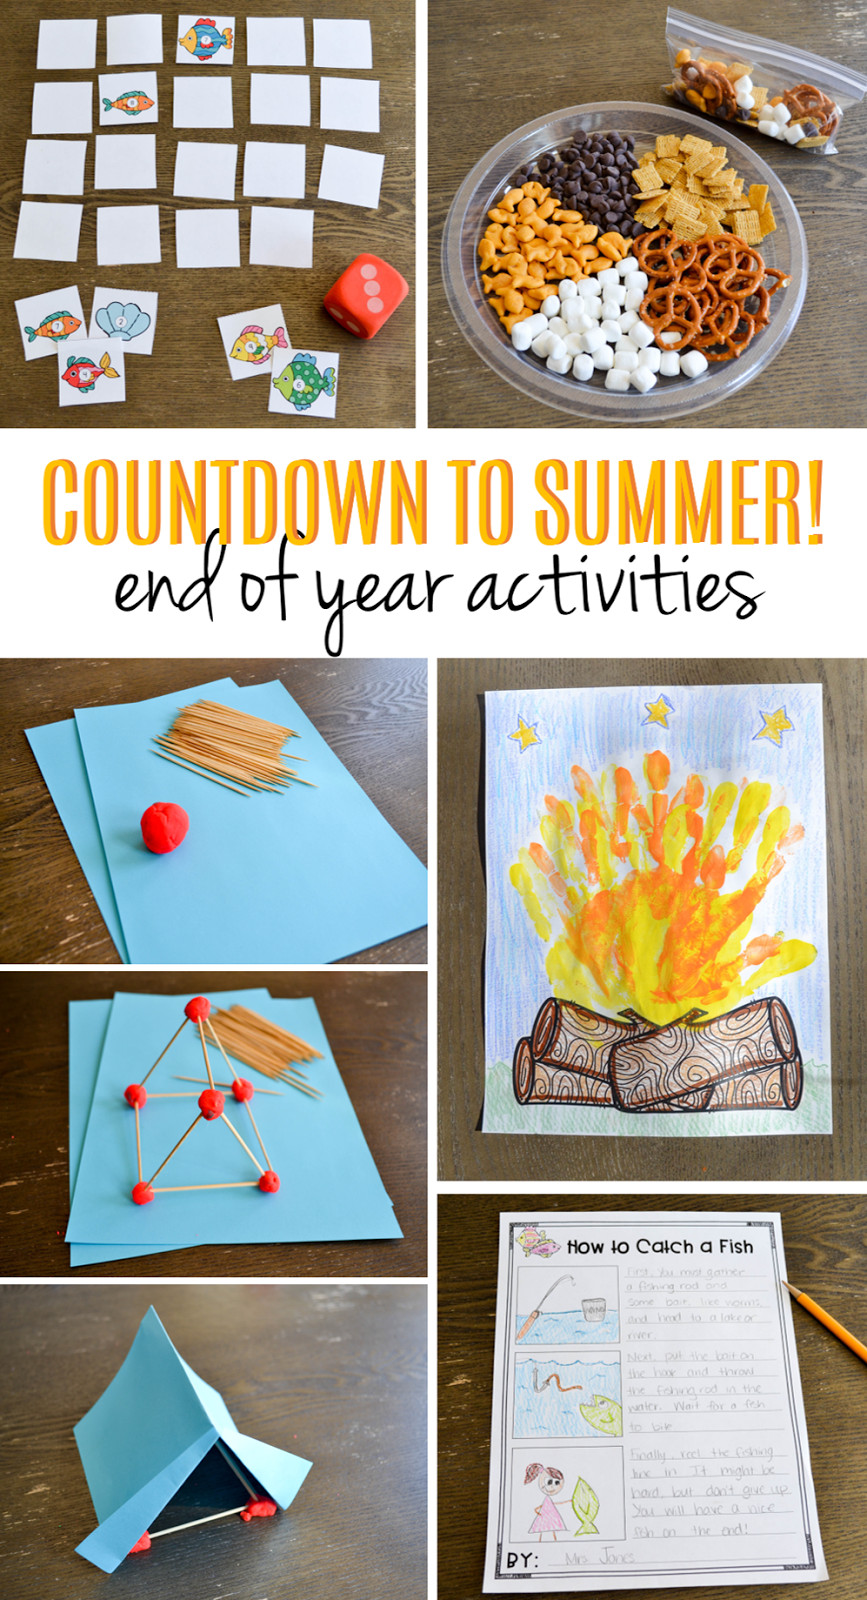 End Of The Year Crafts For Preschoolers
 Susan Jones Teaching Countdown to Summer End of Year